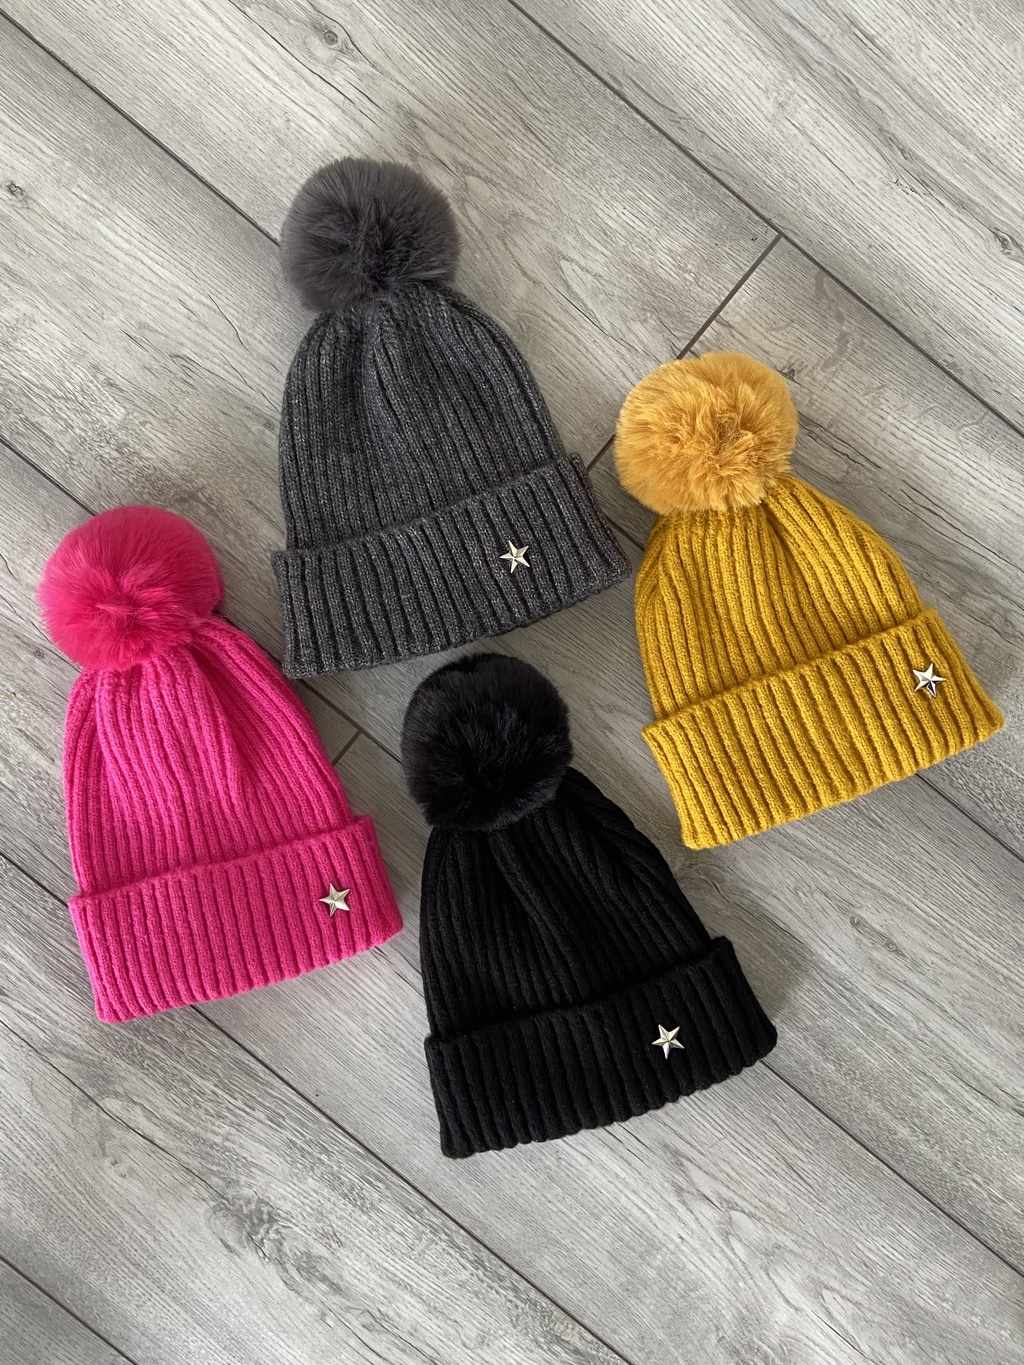 group of bobble hats